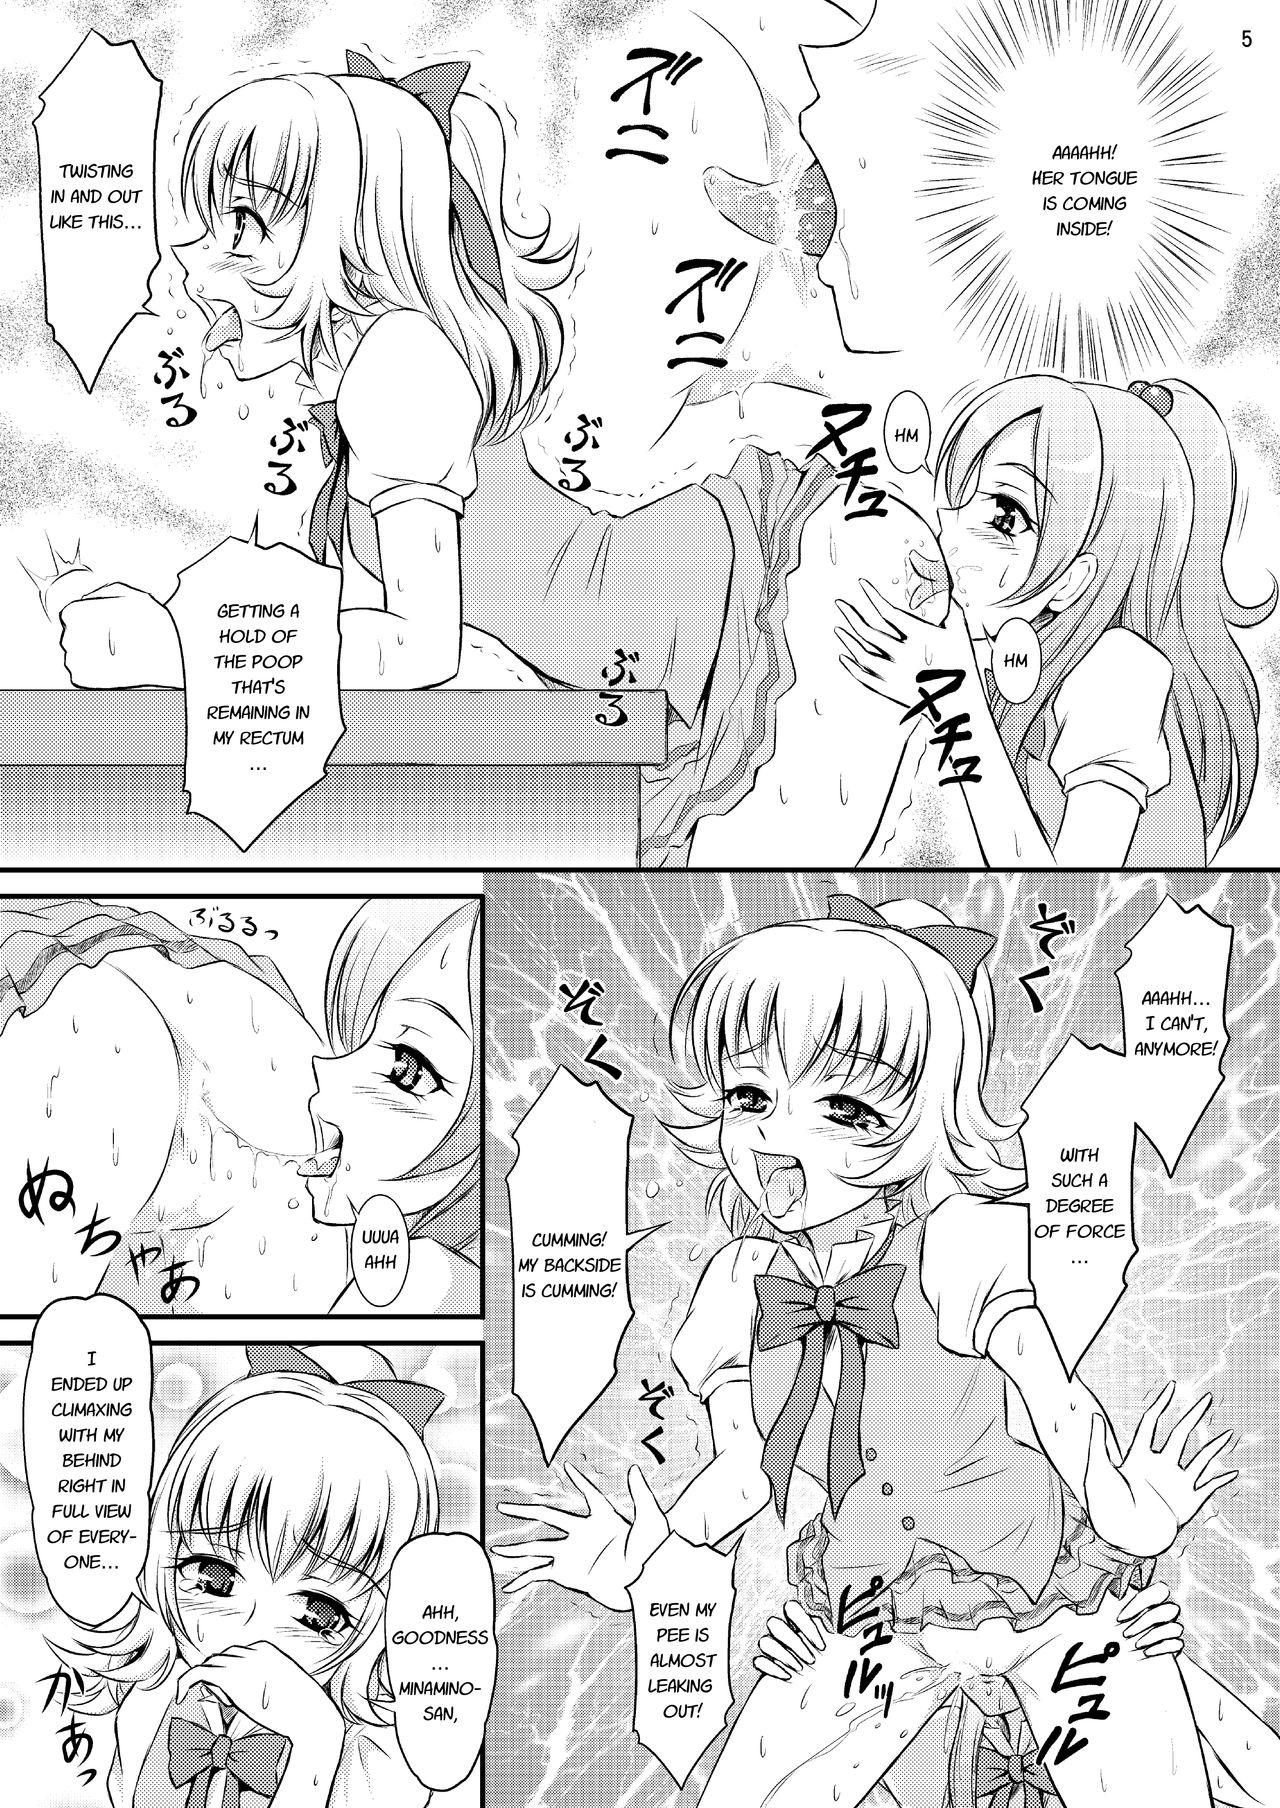 Amateur Pussy Sweets' Hime no Himitsu Recipe - Suite precure Teens - Page 6